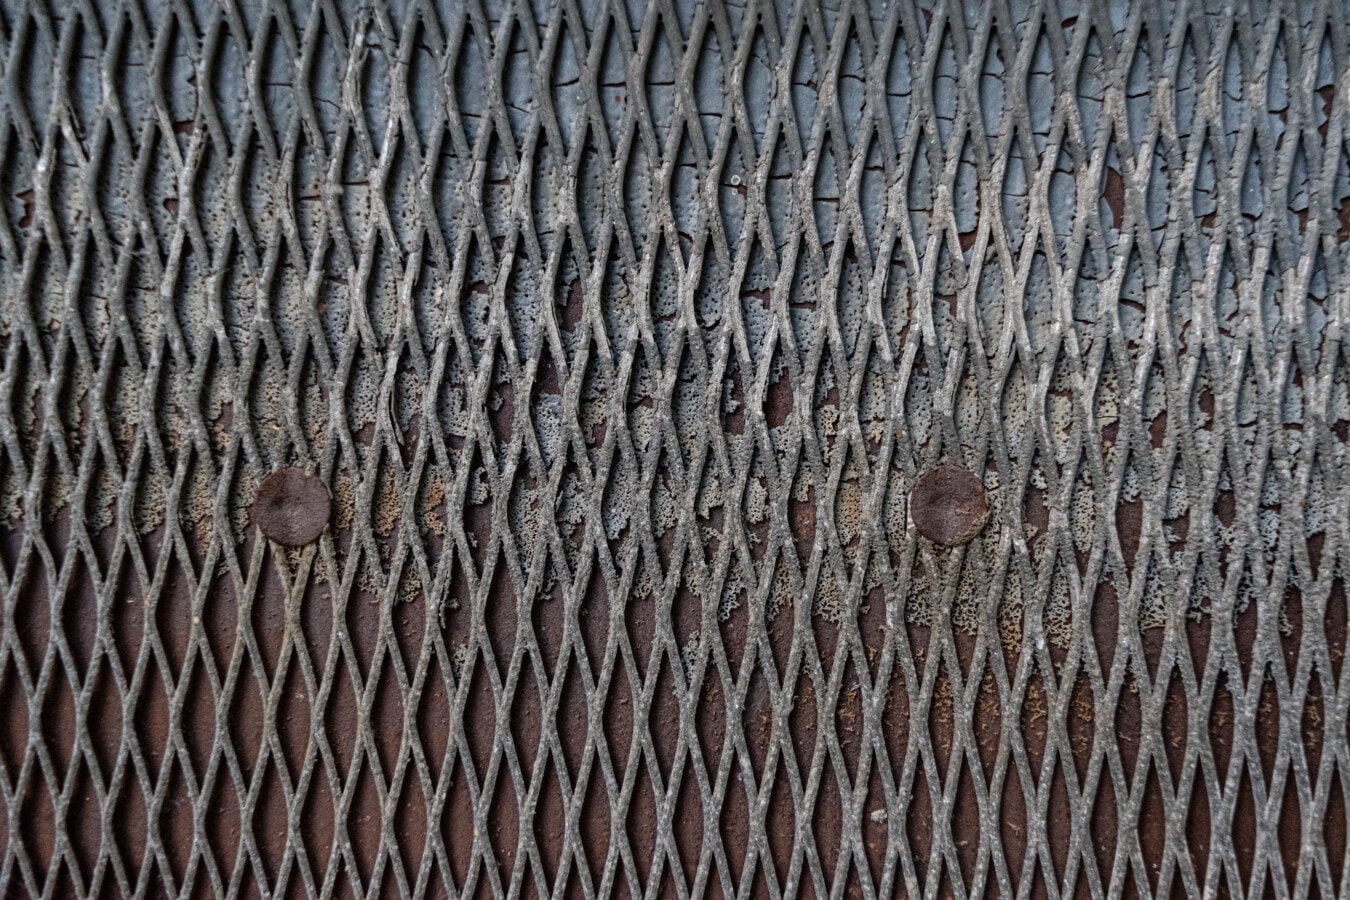 grid, metal, texture, rust, paint, old, barrier, material, abstract, pattern